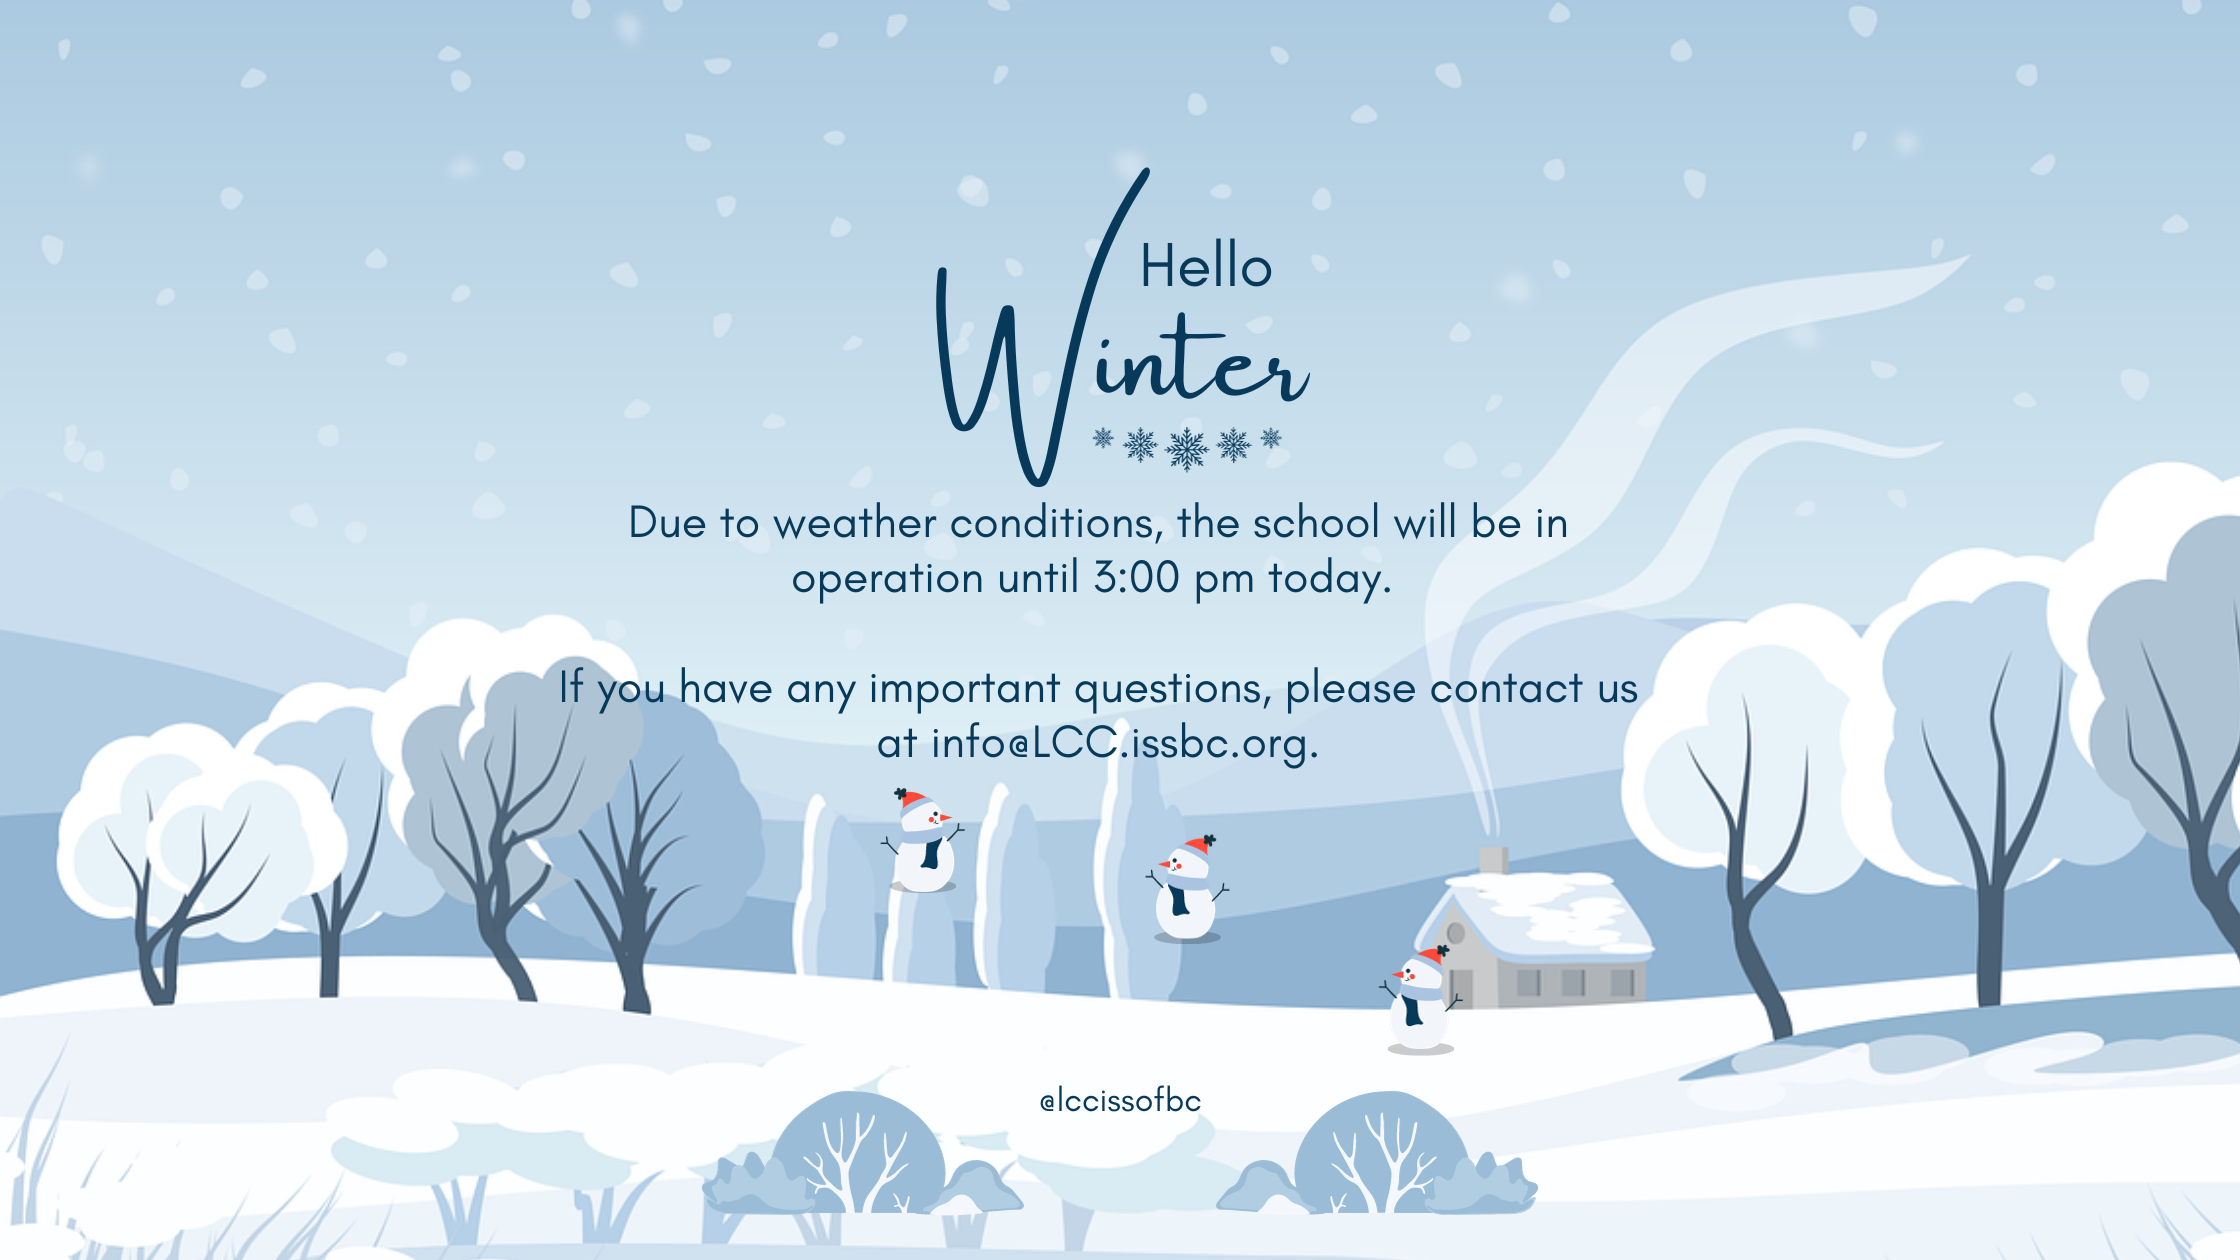 Due to weather conditions, the school will be in operation until 3:00 pm today.